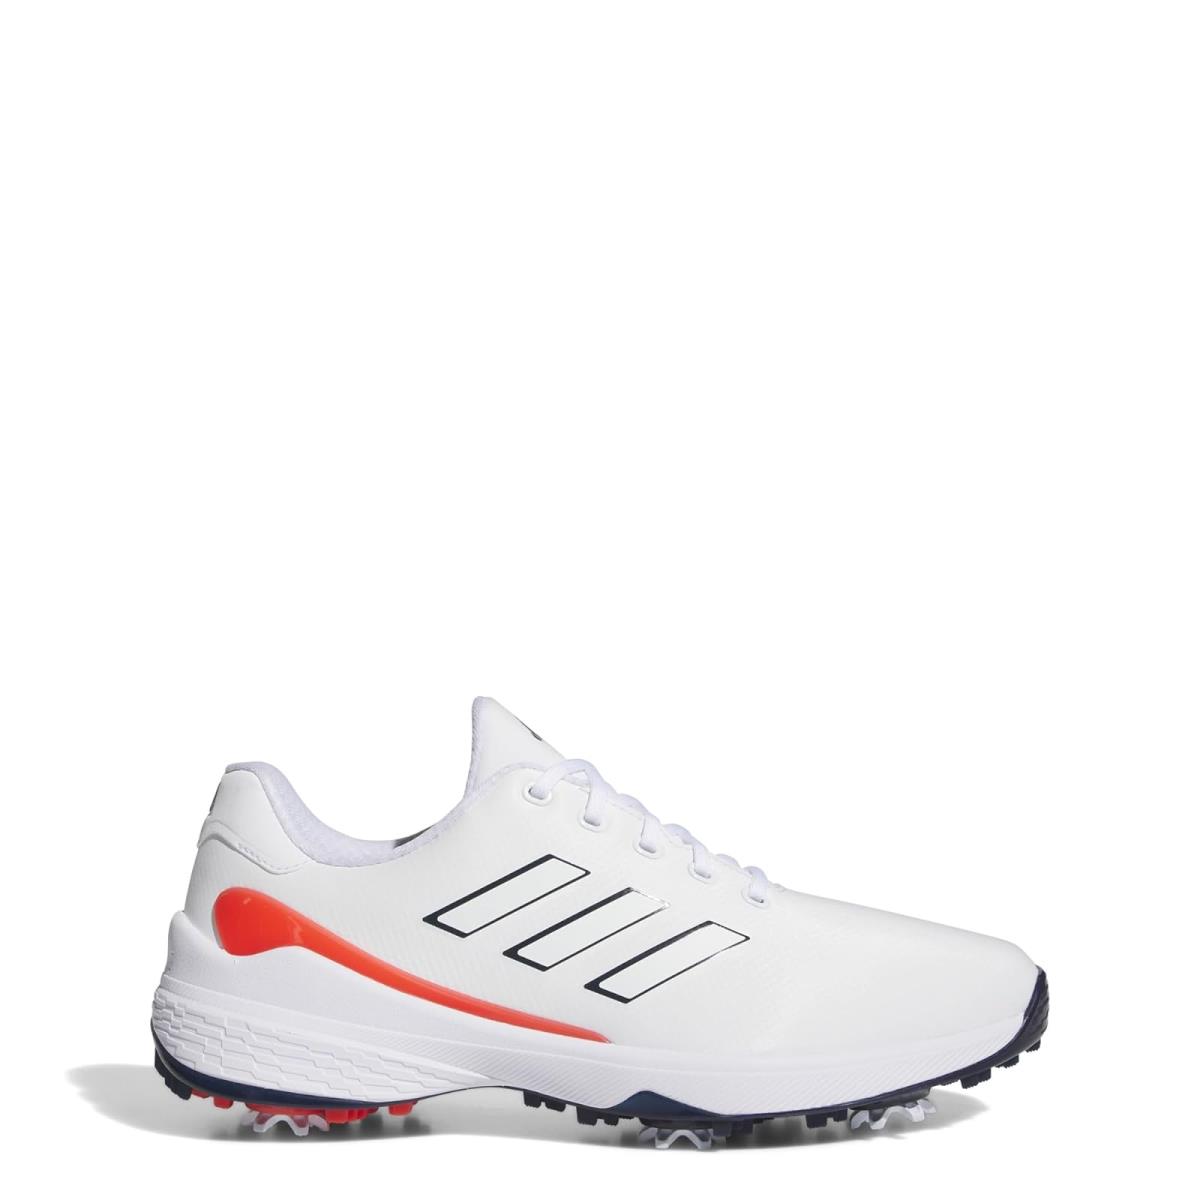 Man`s Sneakers Athletic Shoes Adidas Golf ZG23 Shoes Footwear White/Collegiate Navy/Bright Red